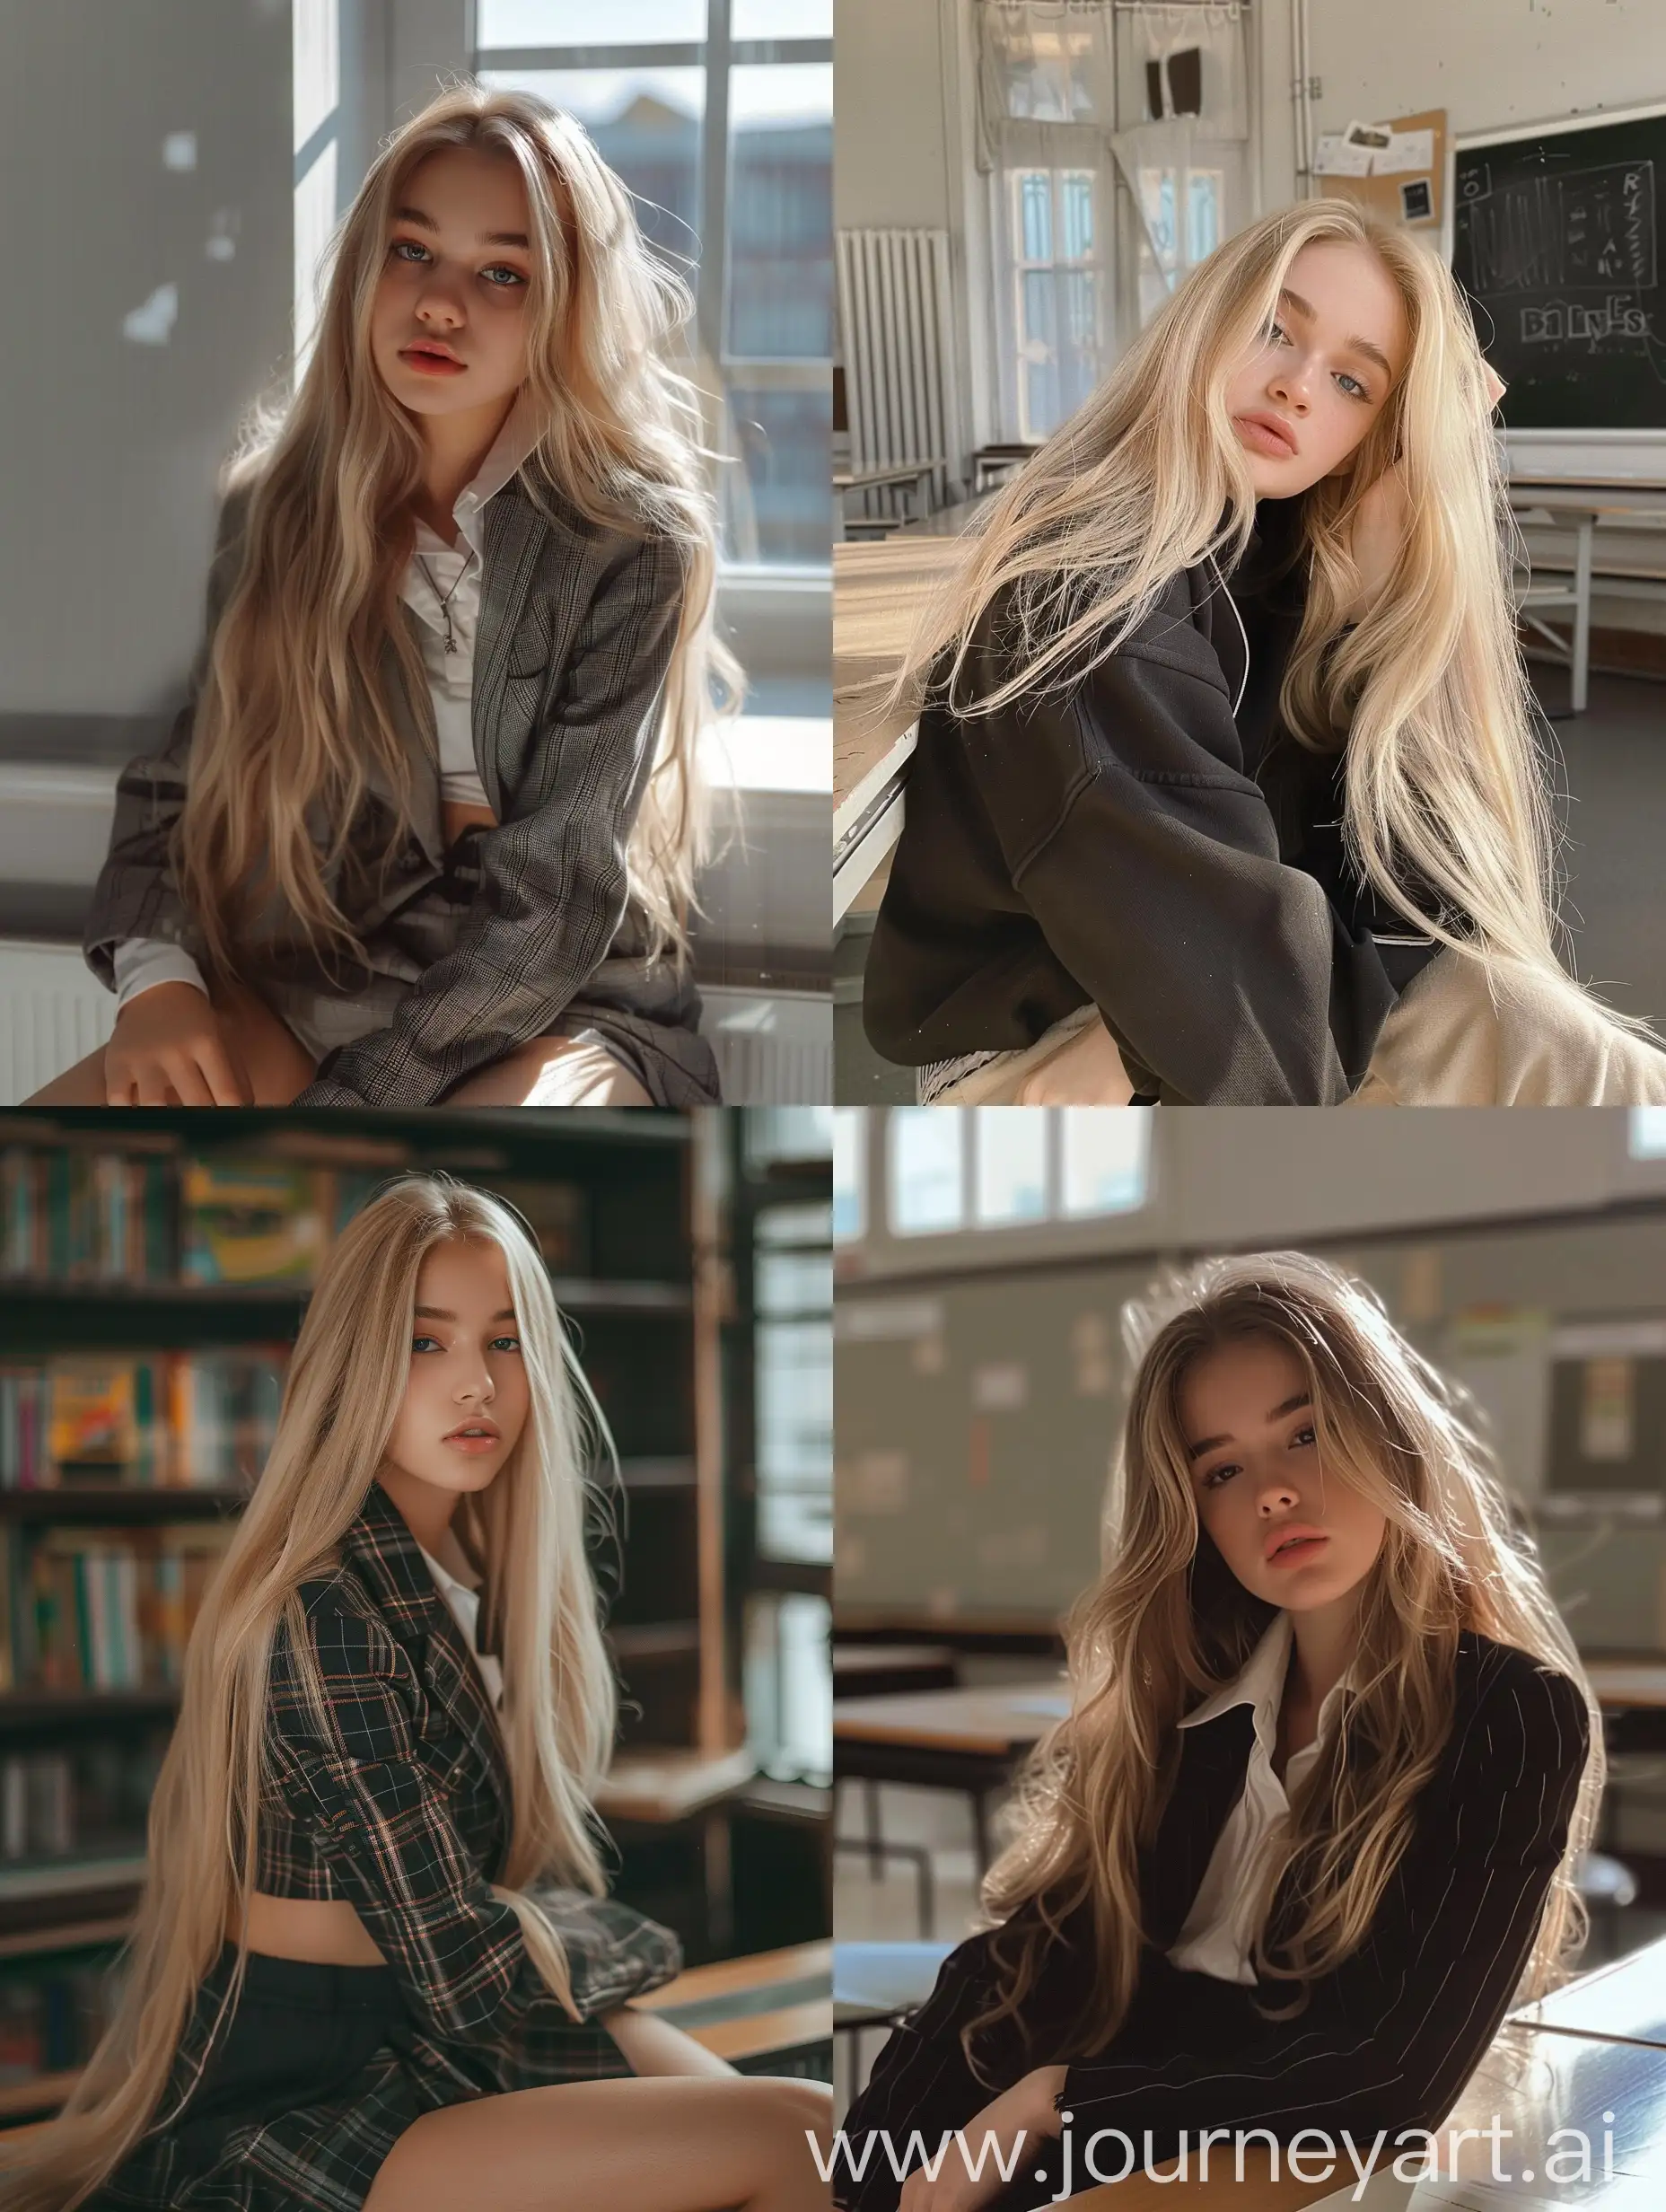 Influencer-Girl-with-Long-Blond-Hair-in-School-Uniform-and-Makeup-Sitting-in-Fitness-Mode